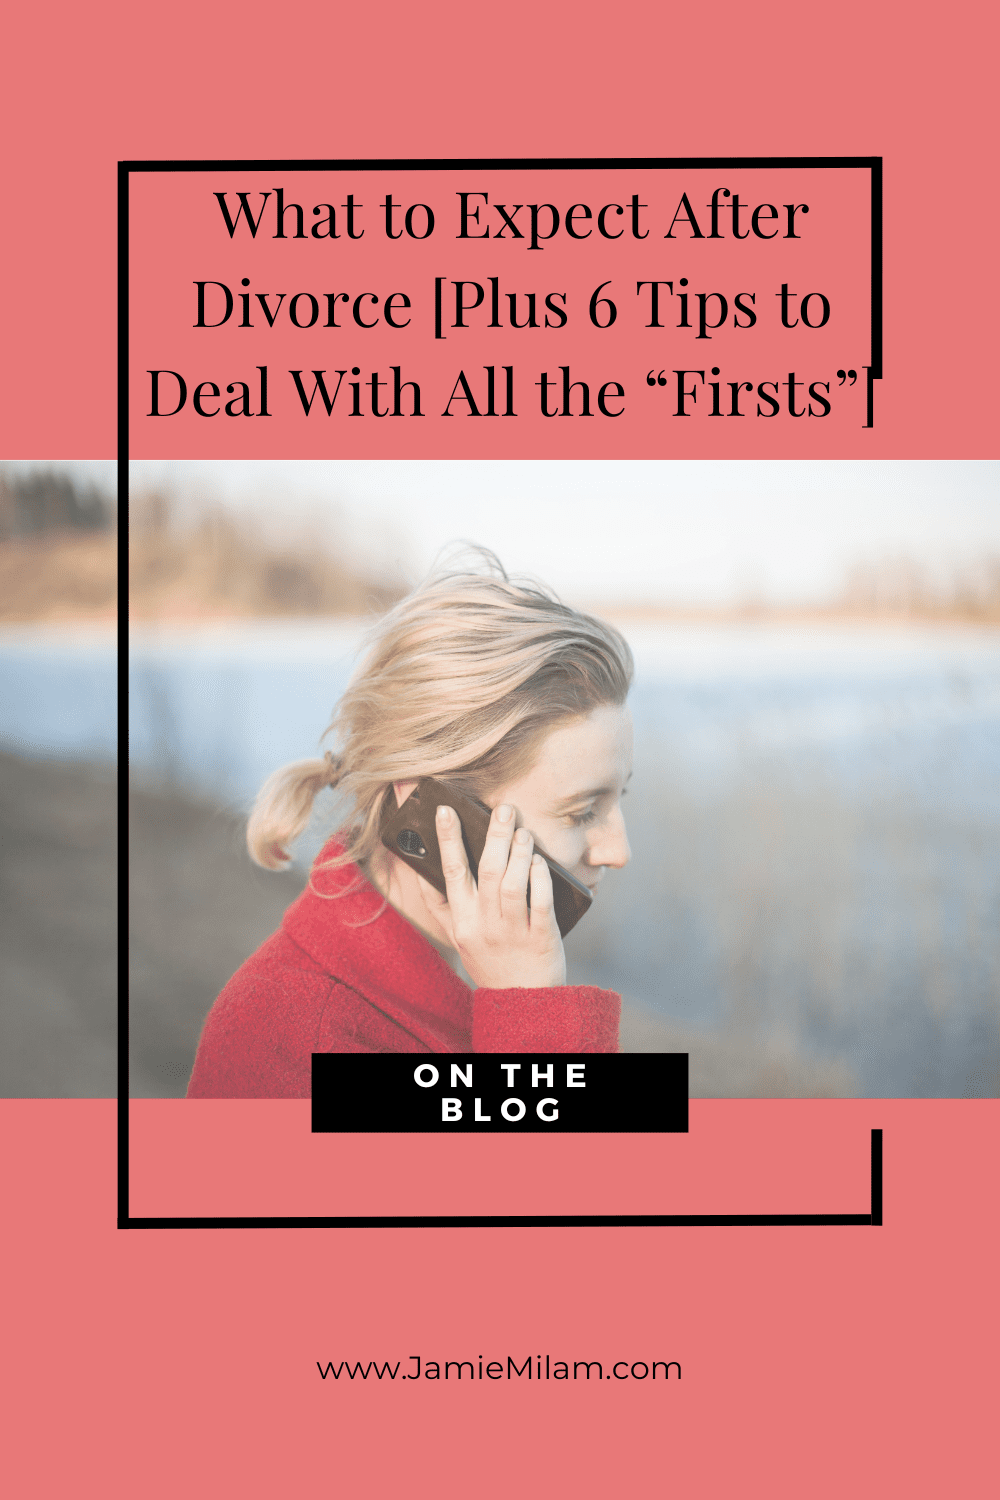 Image of a woman on the phone and the text "What to Expect After Divorce: 6 Tips to Navigate the "Firsts"